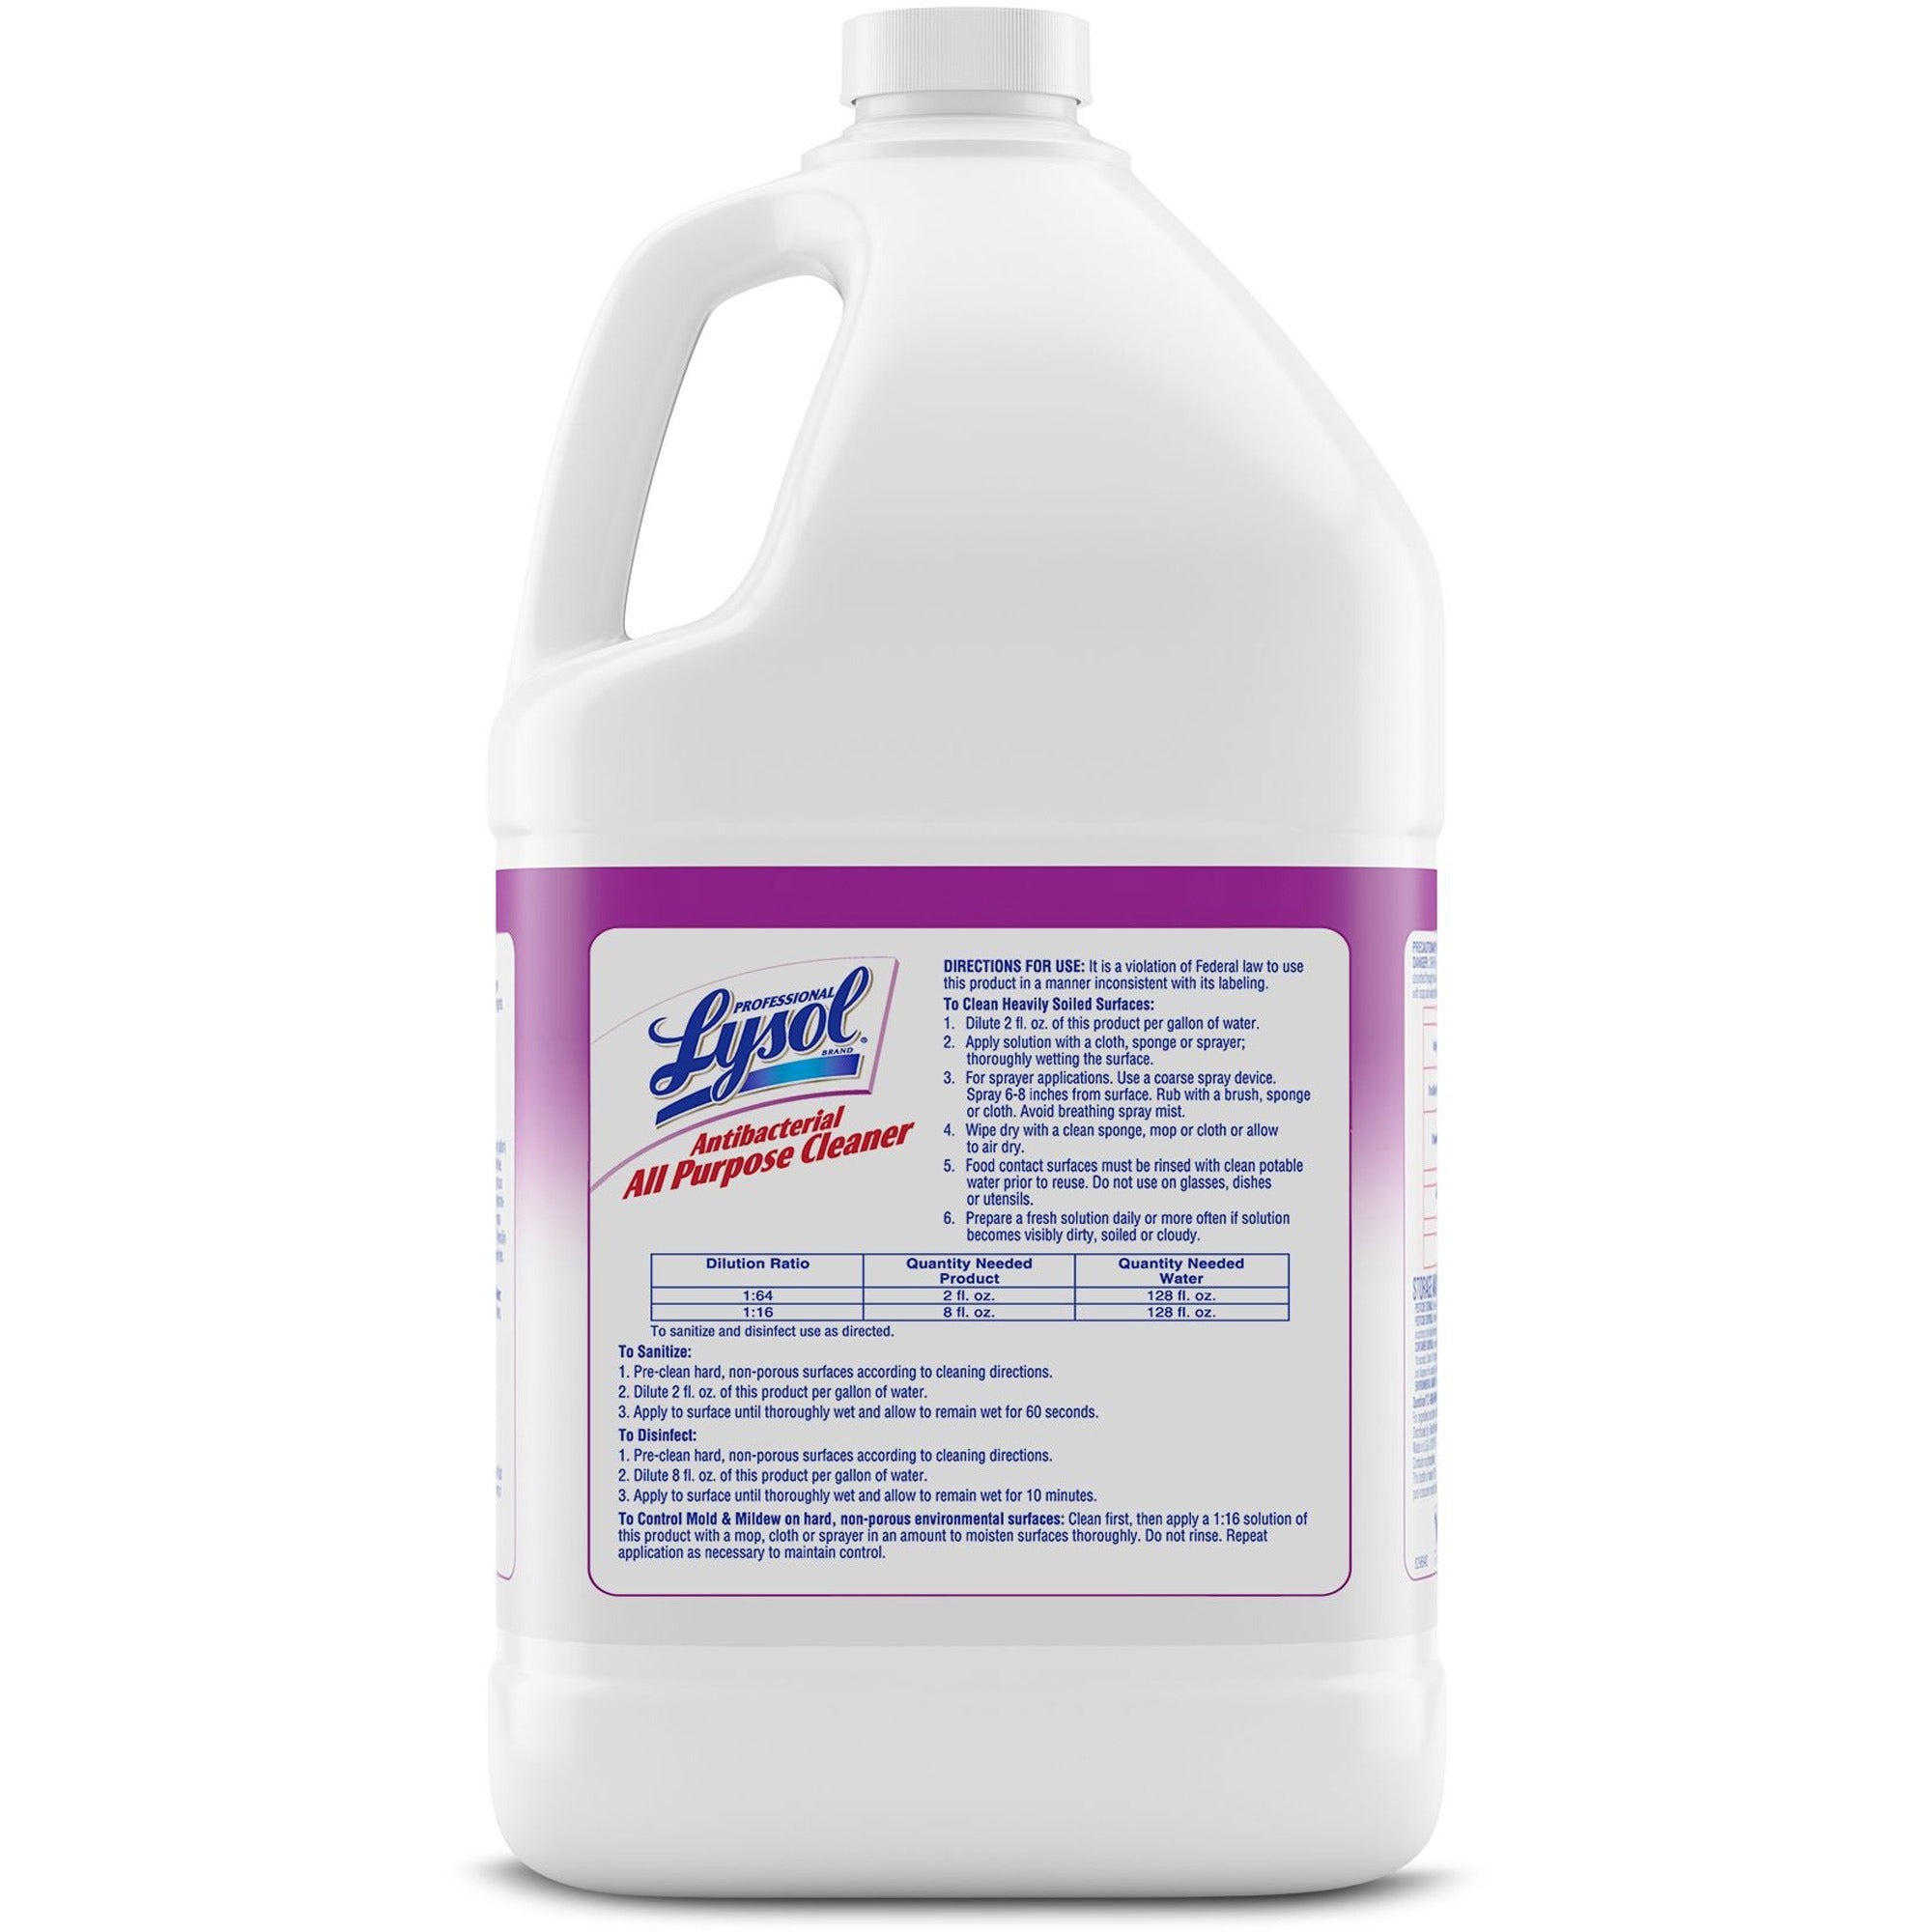 professional-lysol-antibacterial-all-purpose-cleaner-concentrate-128-fl-oz-4-quart-4-carton-heavy-duty-anti-bacterial-disinfectant-clear-fluorescent-green_rac74392ct - 3